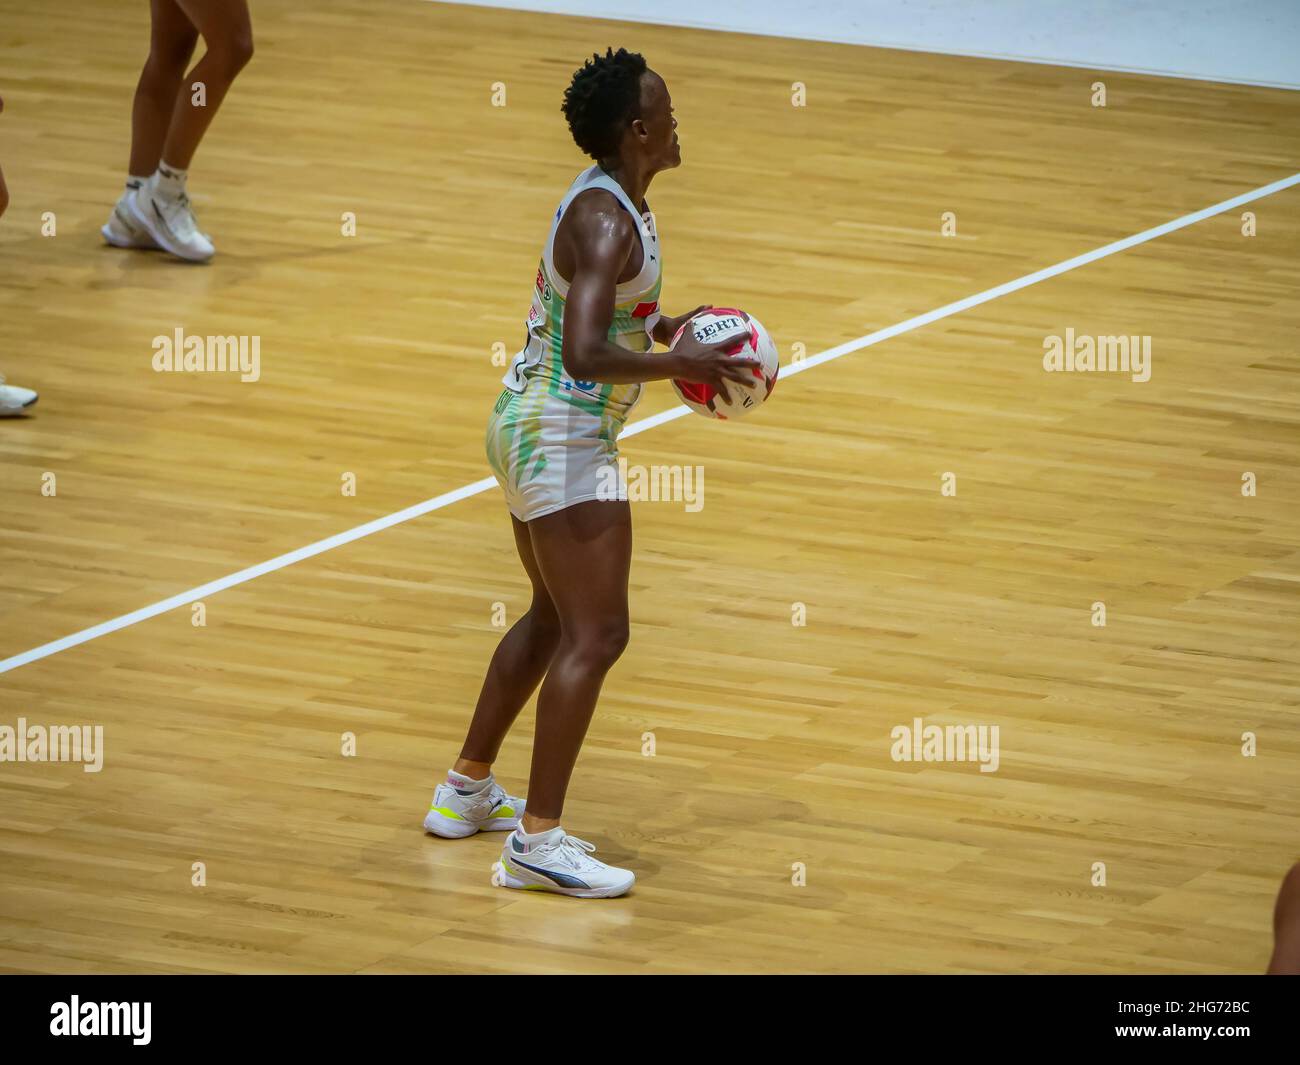 London, UK. 18th Jan, 2022. Copper Box Arena, London, 18th January 2022 Bongiwe Msomi (C - South Africa Proteas) looks for the pass in the match between Proteas (South Africa) and Silver Ferns (New Zealand) in the Quad Series at the Copper Box Arena, London on 18th January 2022 Claire Jeffrey/SPP Credit: SPP Sport Press Photo. /Alamy Live News Stock Photo